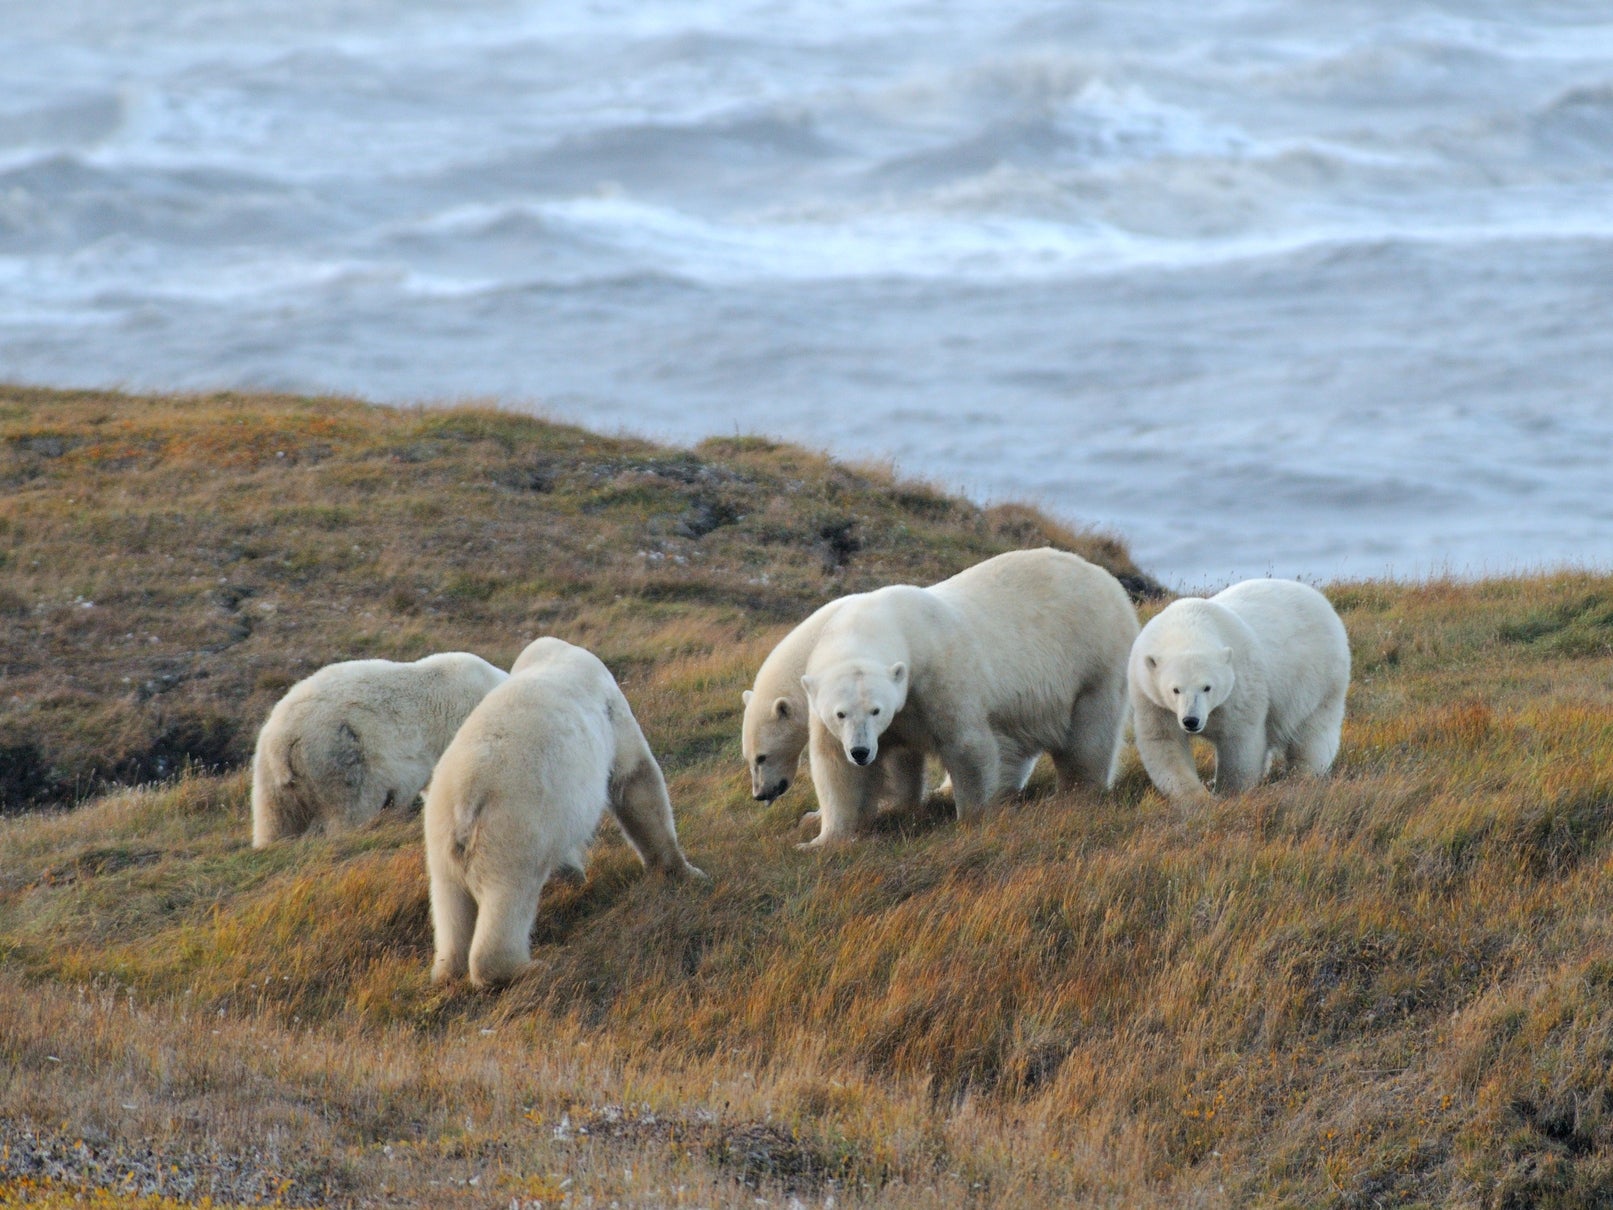 Bears on an Island in the Beaufort Sea of Northern Alaska. As sea ice melts bears are increasingly forced onto land making hunting for seals almost impossible